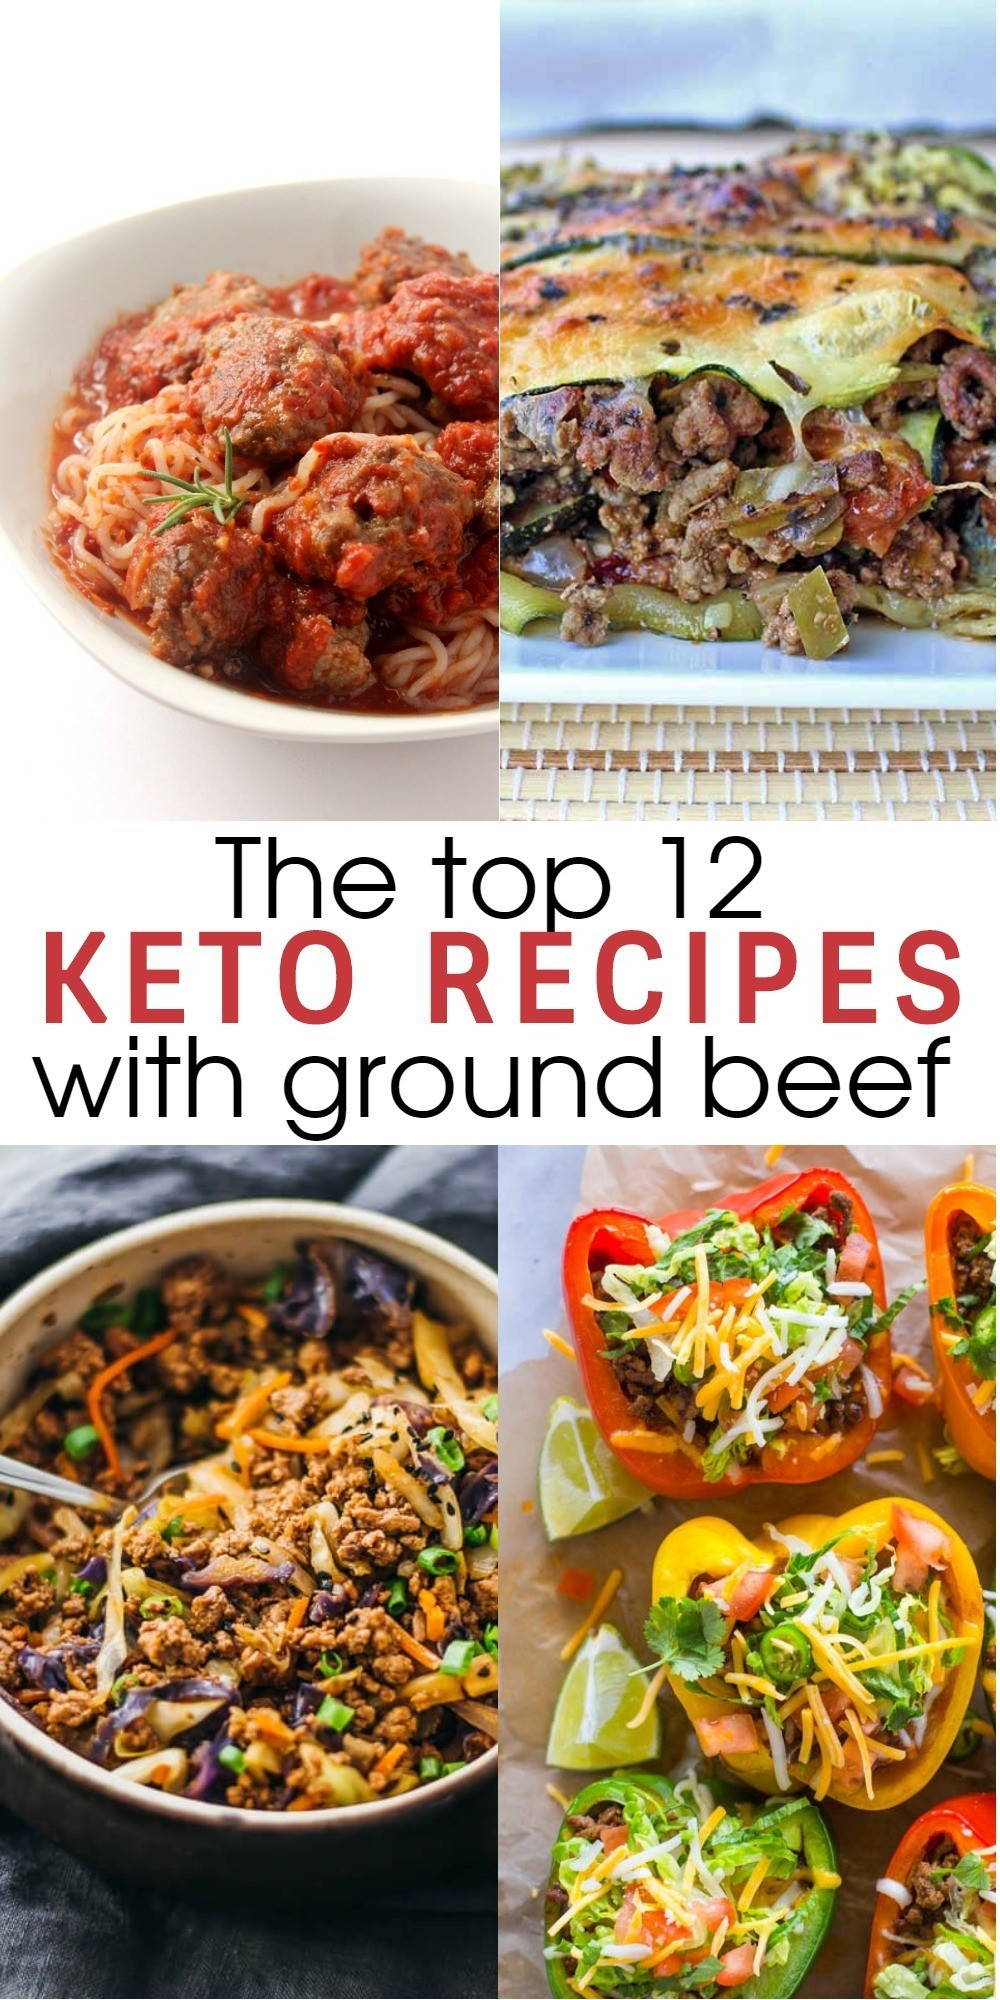 Ground Beef Keto Recipes Easy
 12 Flavorful and Easy Keto Recipes With Ground Beef To Try